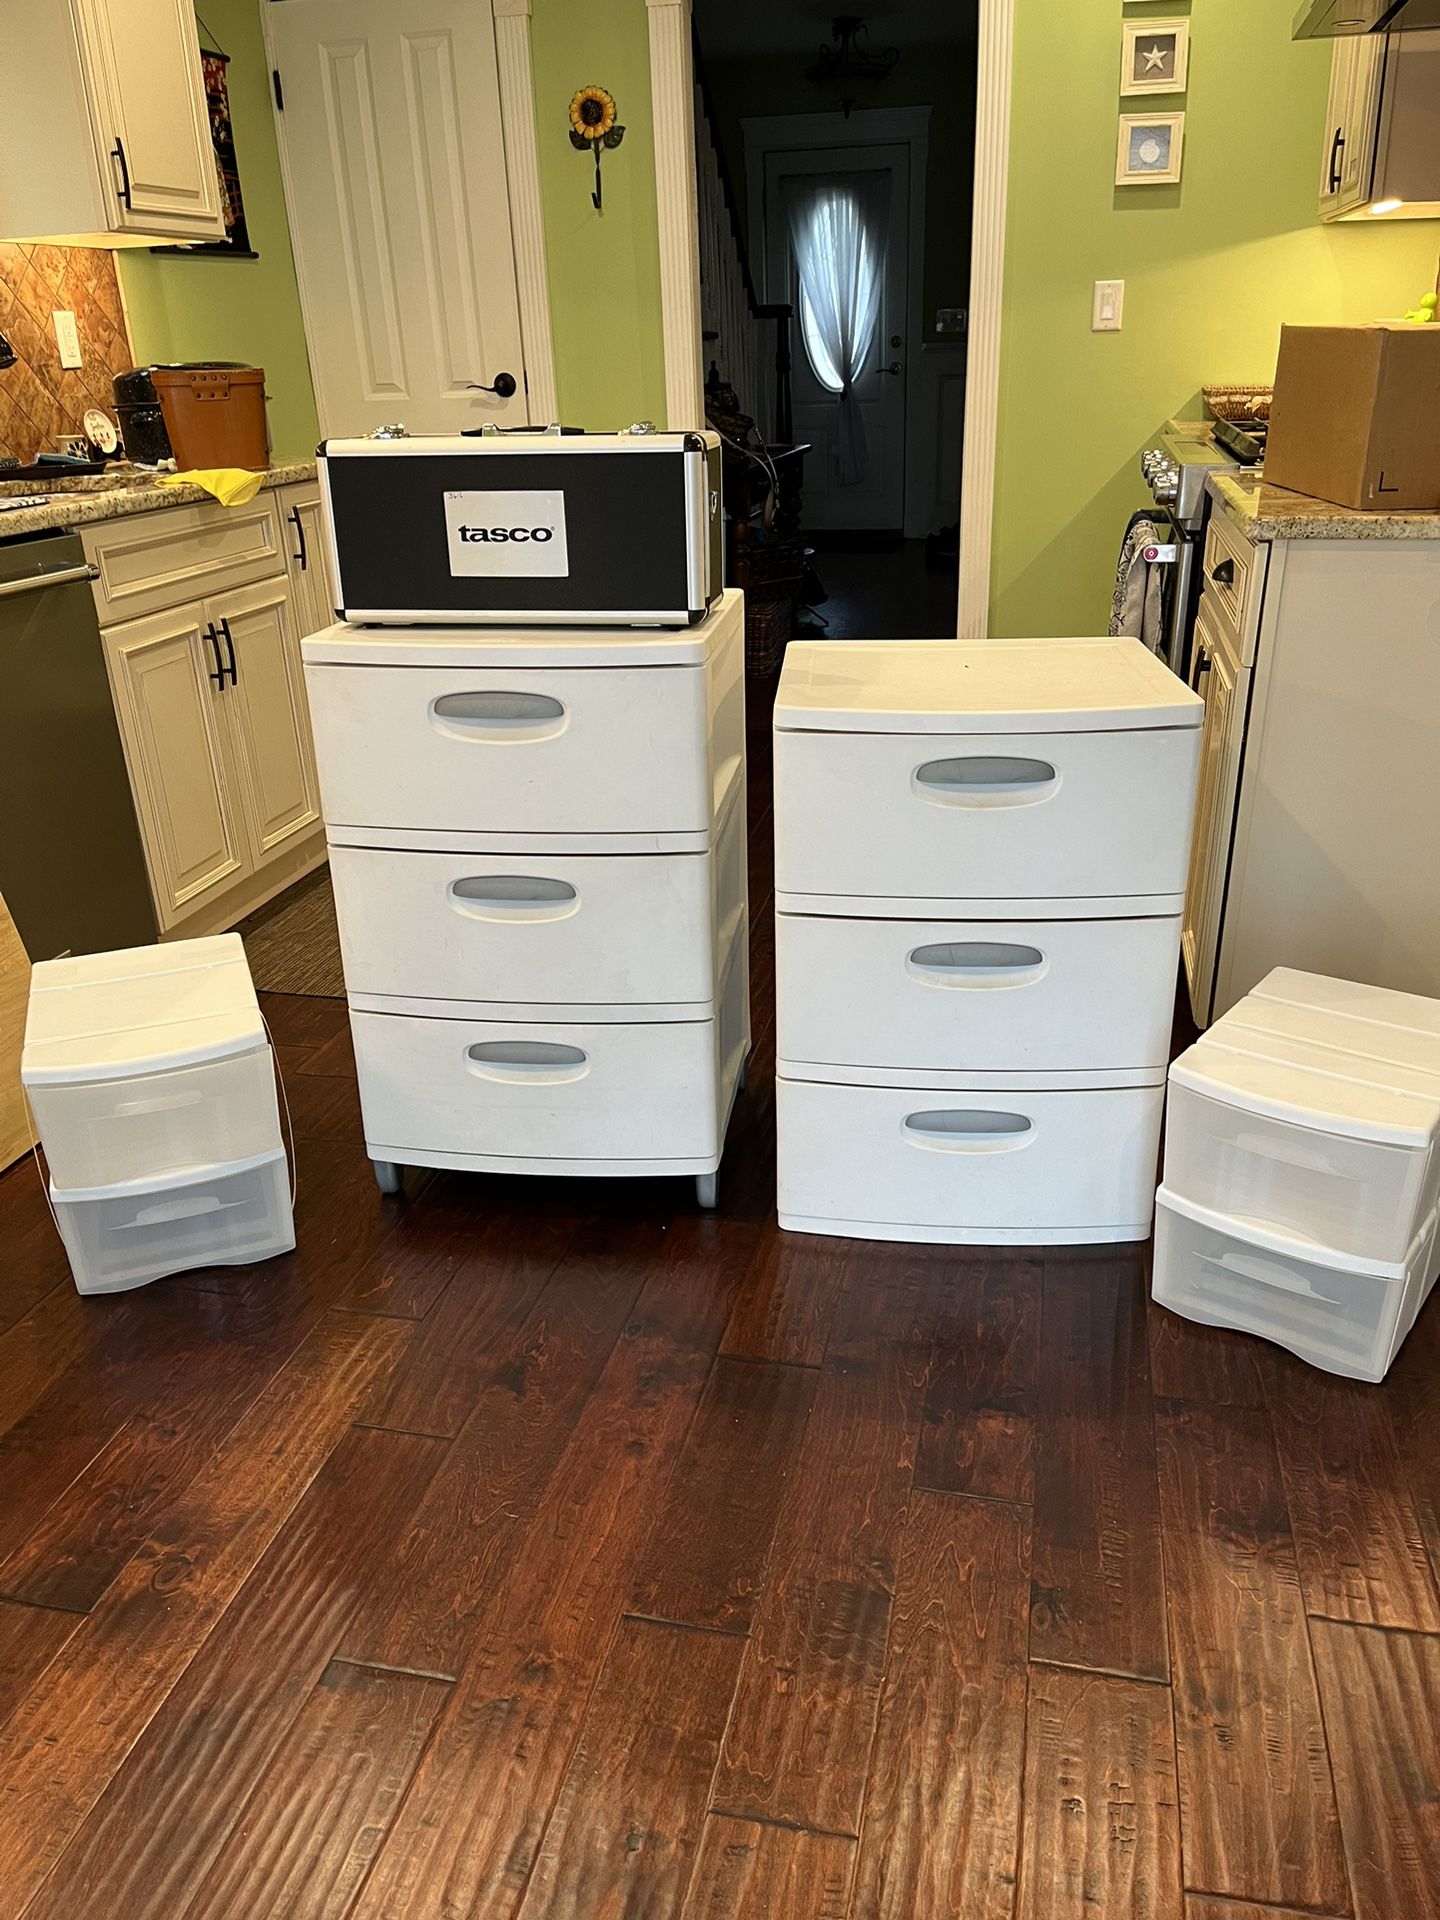 XL Heavy Duty Sterlite Storage Cabinet - 2 Available $20 Each Plus More see below 